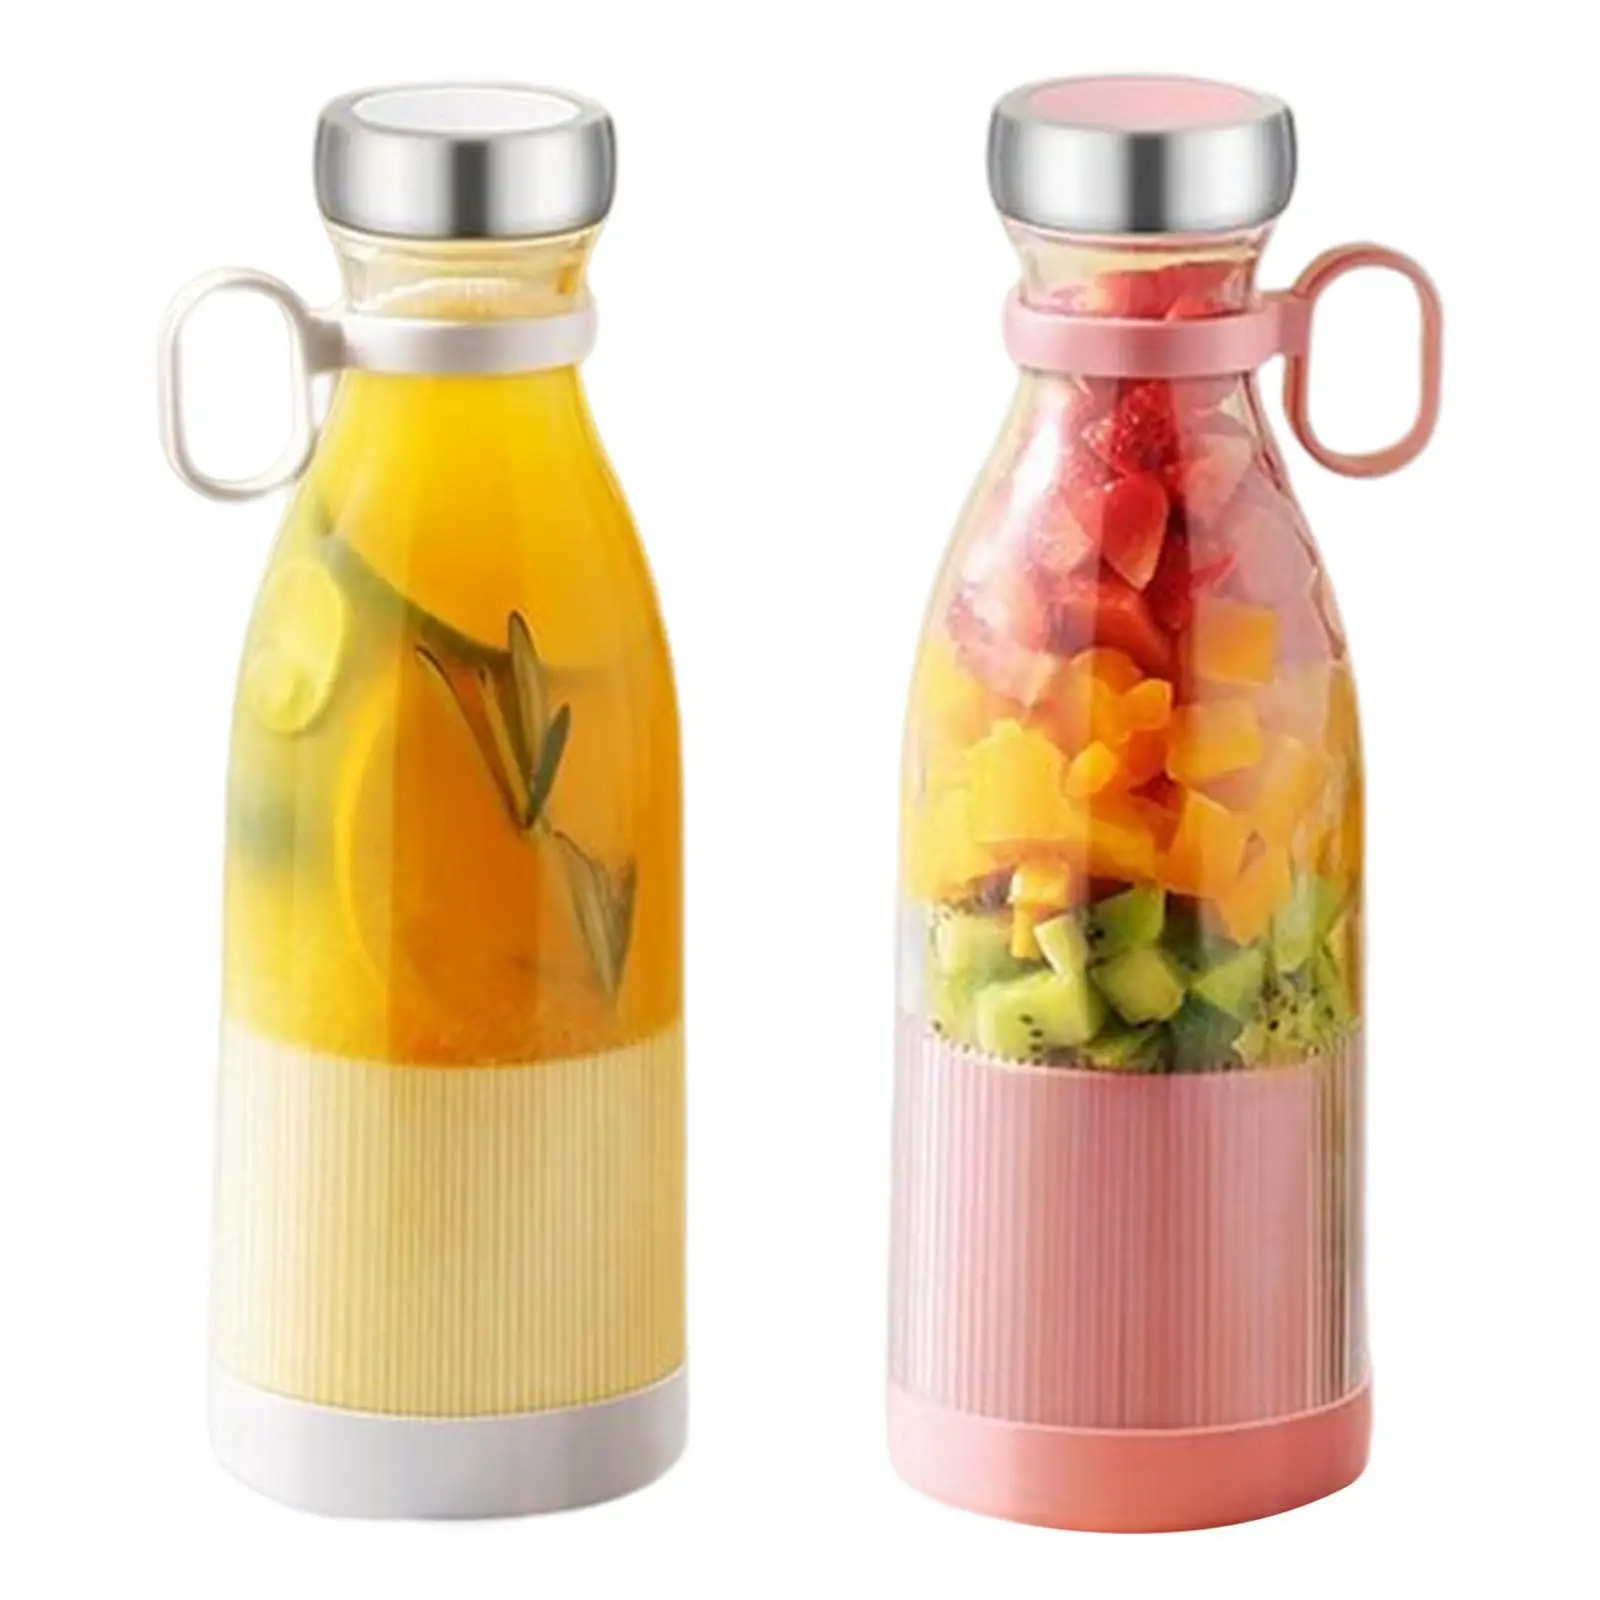 Multifunction Electric Juicer Portable Fruit Juicing Cup Blender USB Rechargeable Fruit Mixers mini Home Outdoor Shakes Food